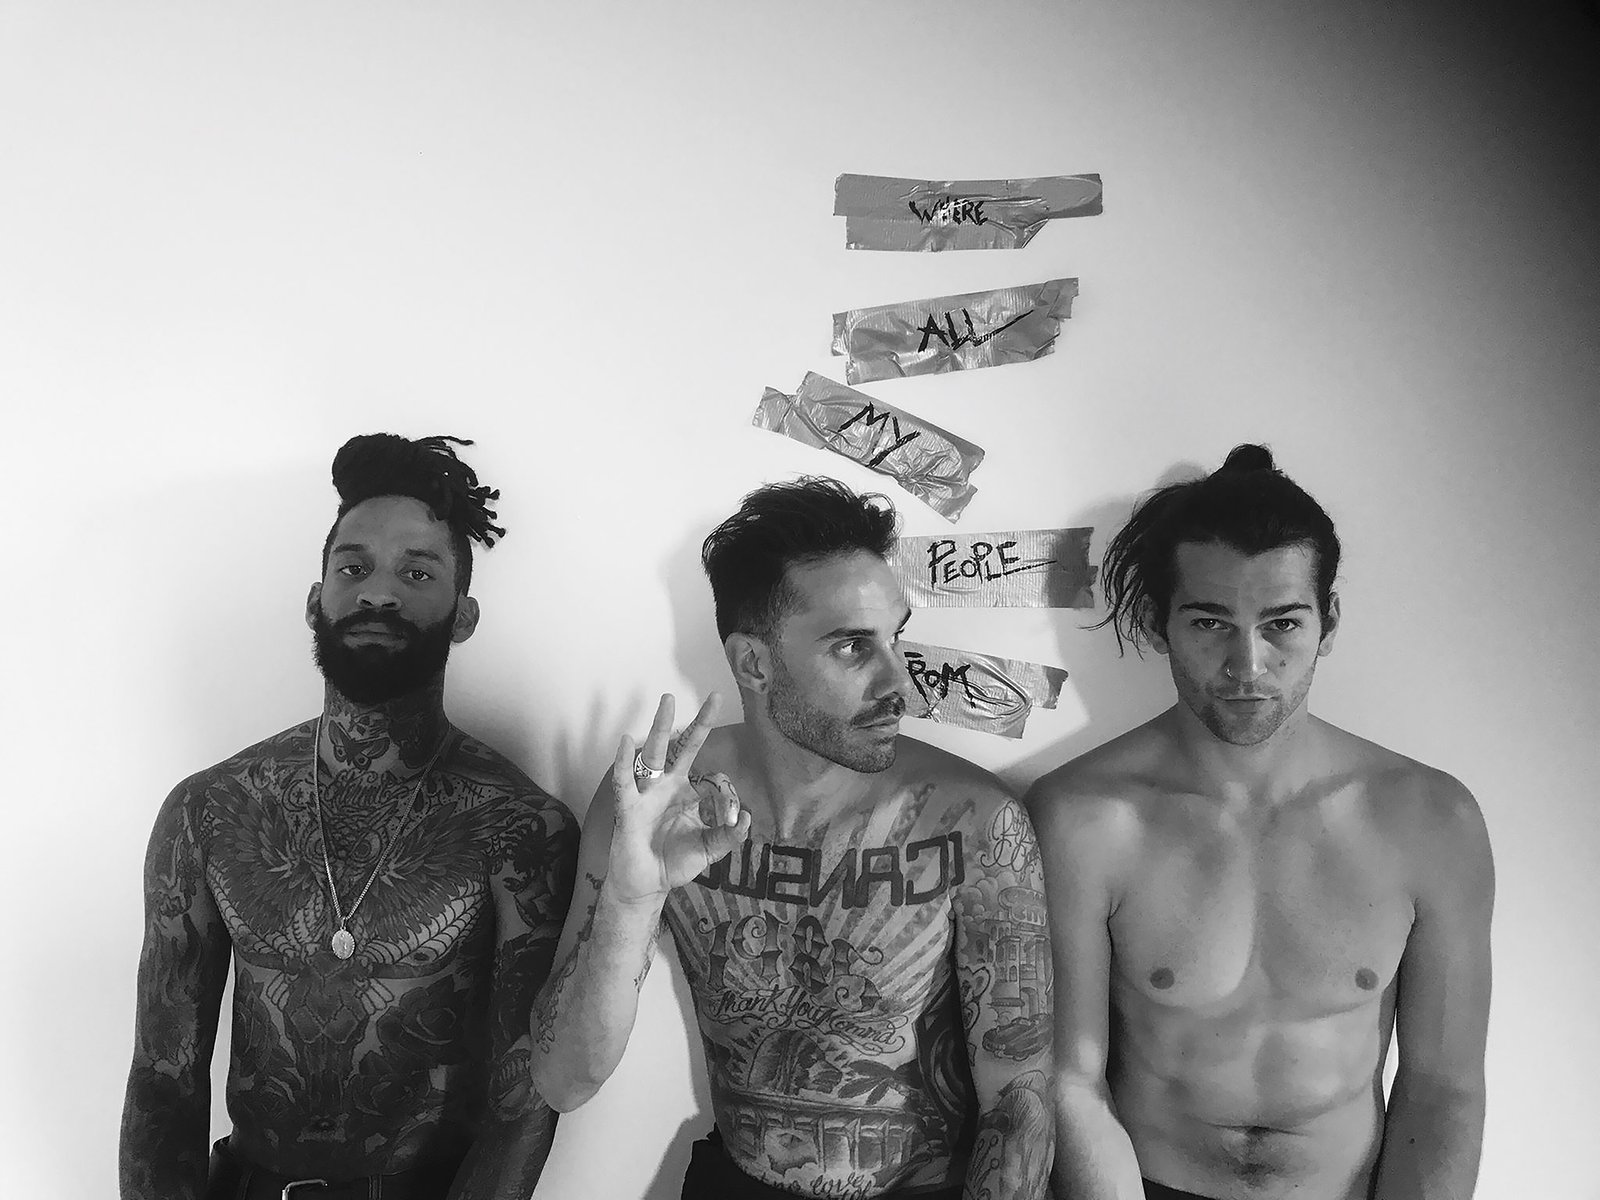 Fever 333 – “Strength In Numb333rs”